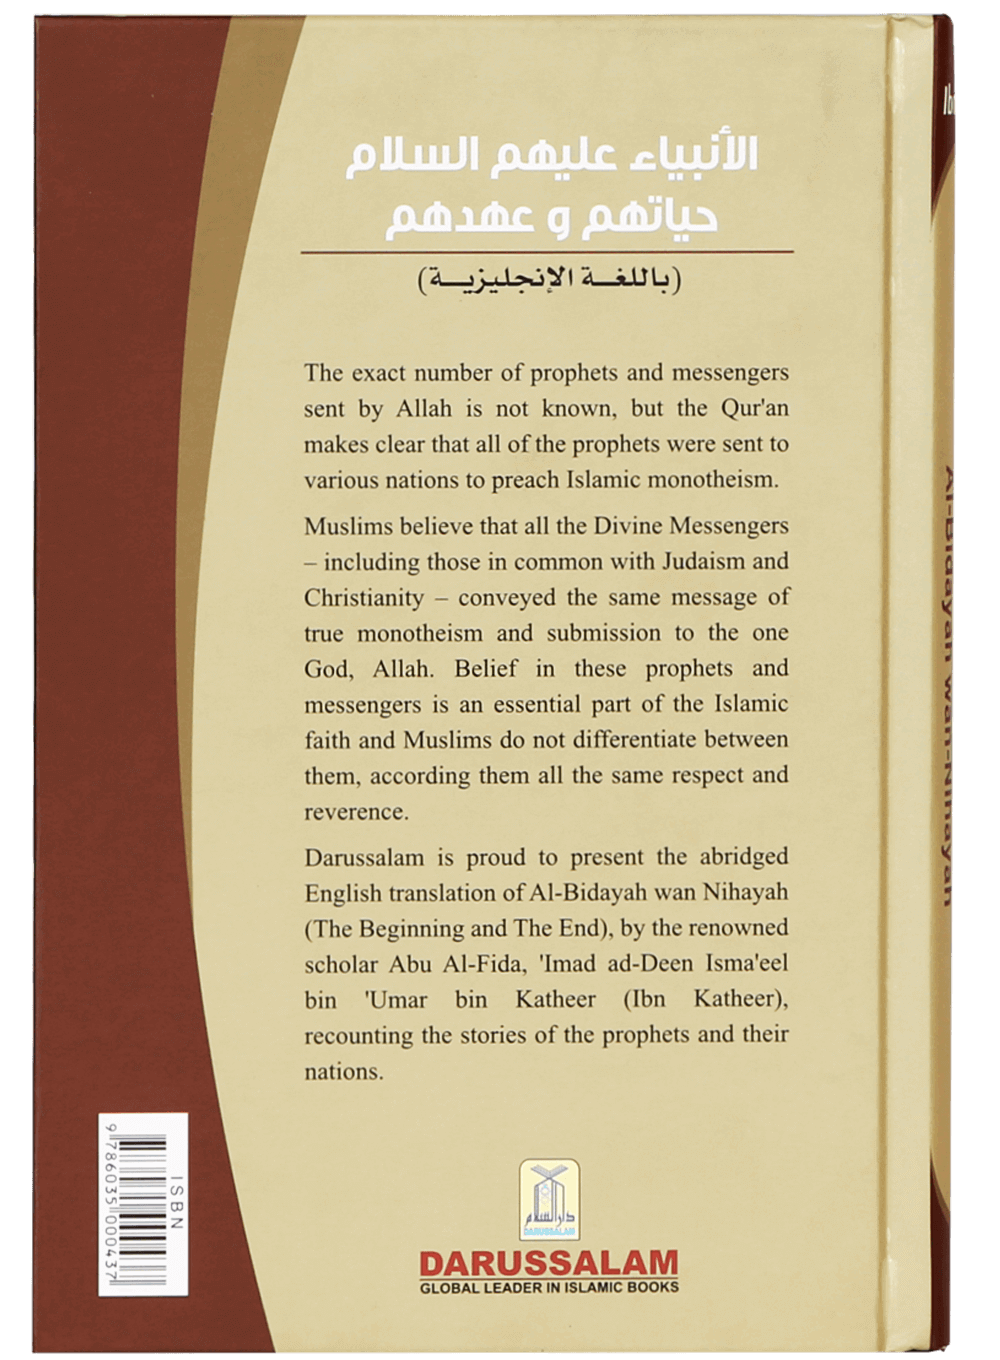 Life and Times of the Messengers & Prophets by Ibn Kathir